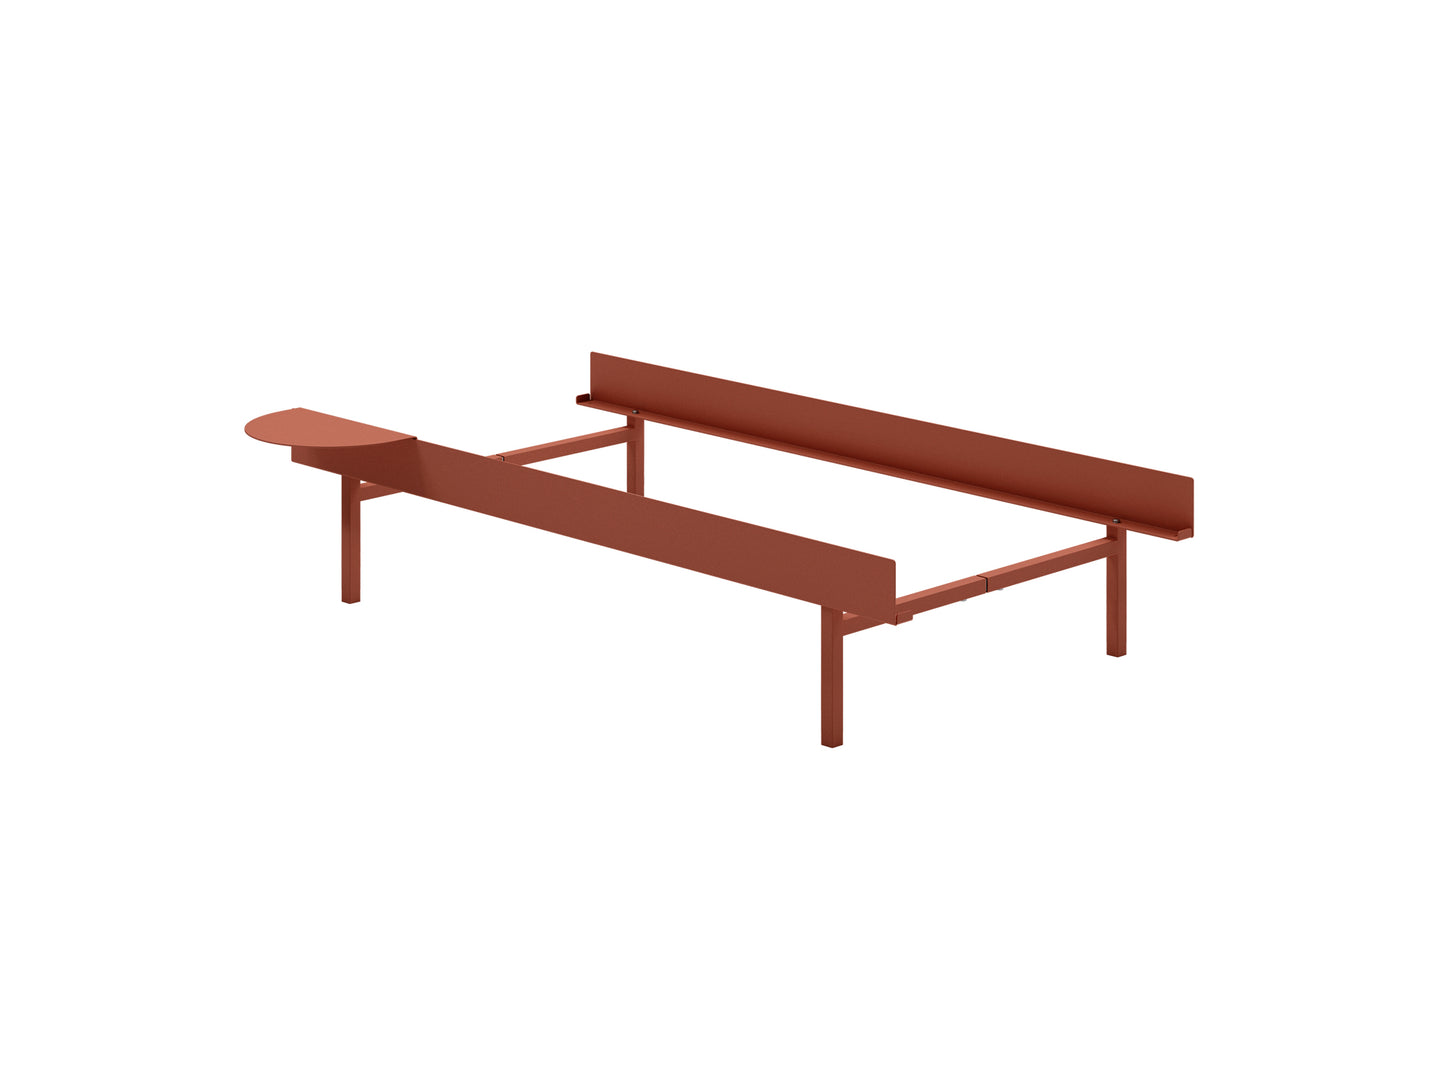 Bed 90 - 180 cm (High) by Moebe- Bed Frame / with NO SLATS / 1 Side Table / Terracotta